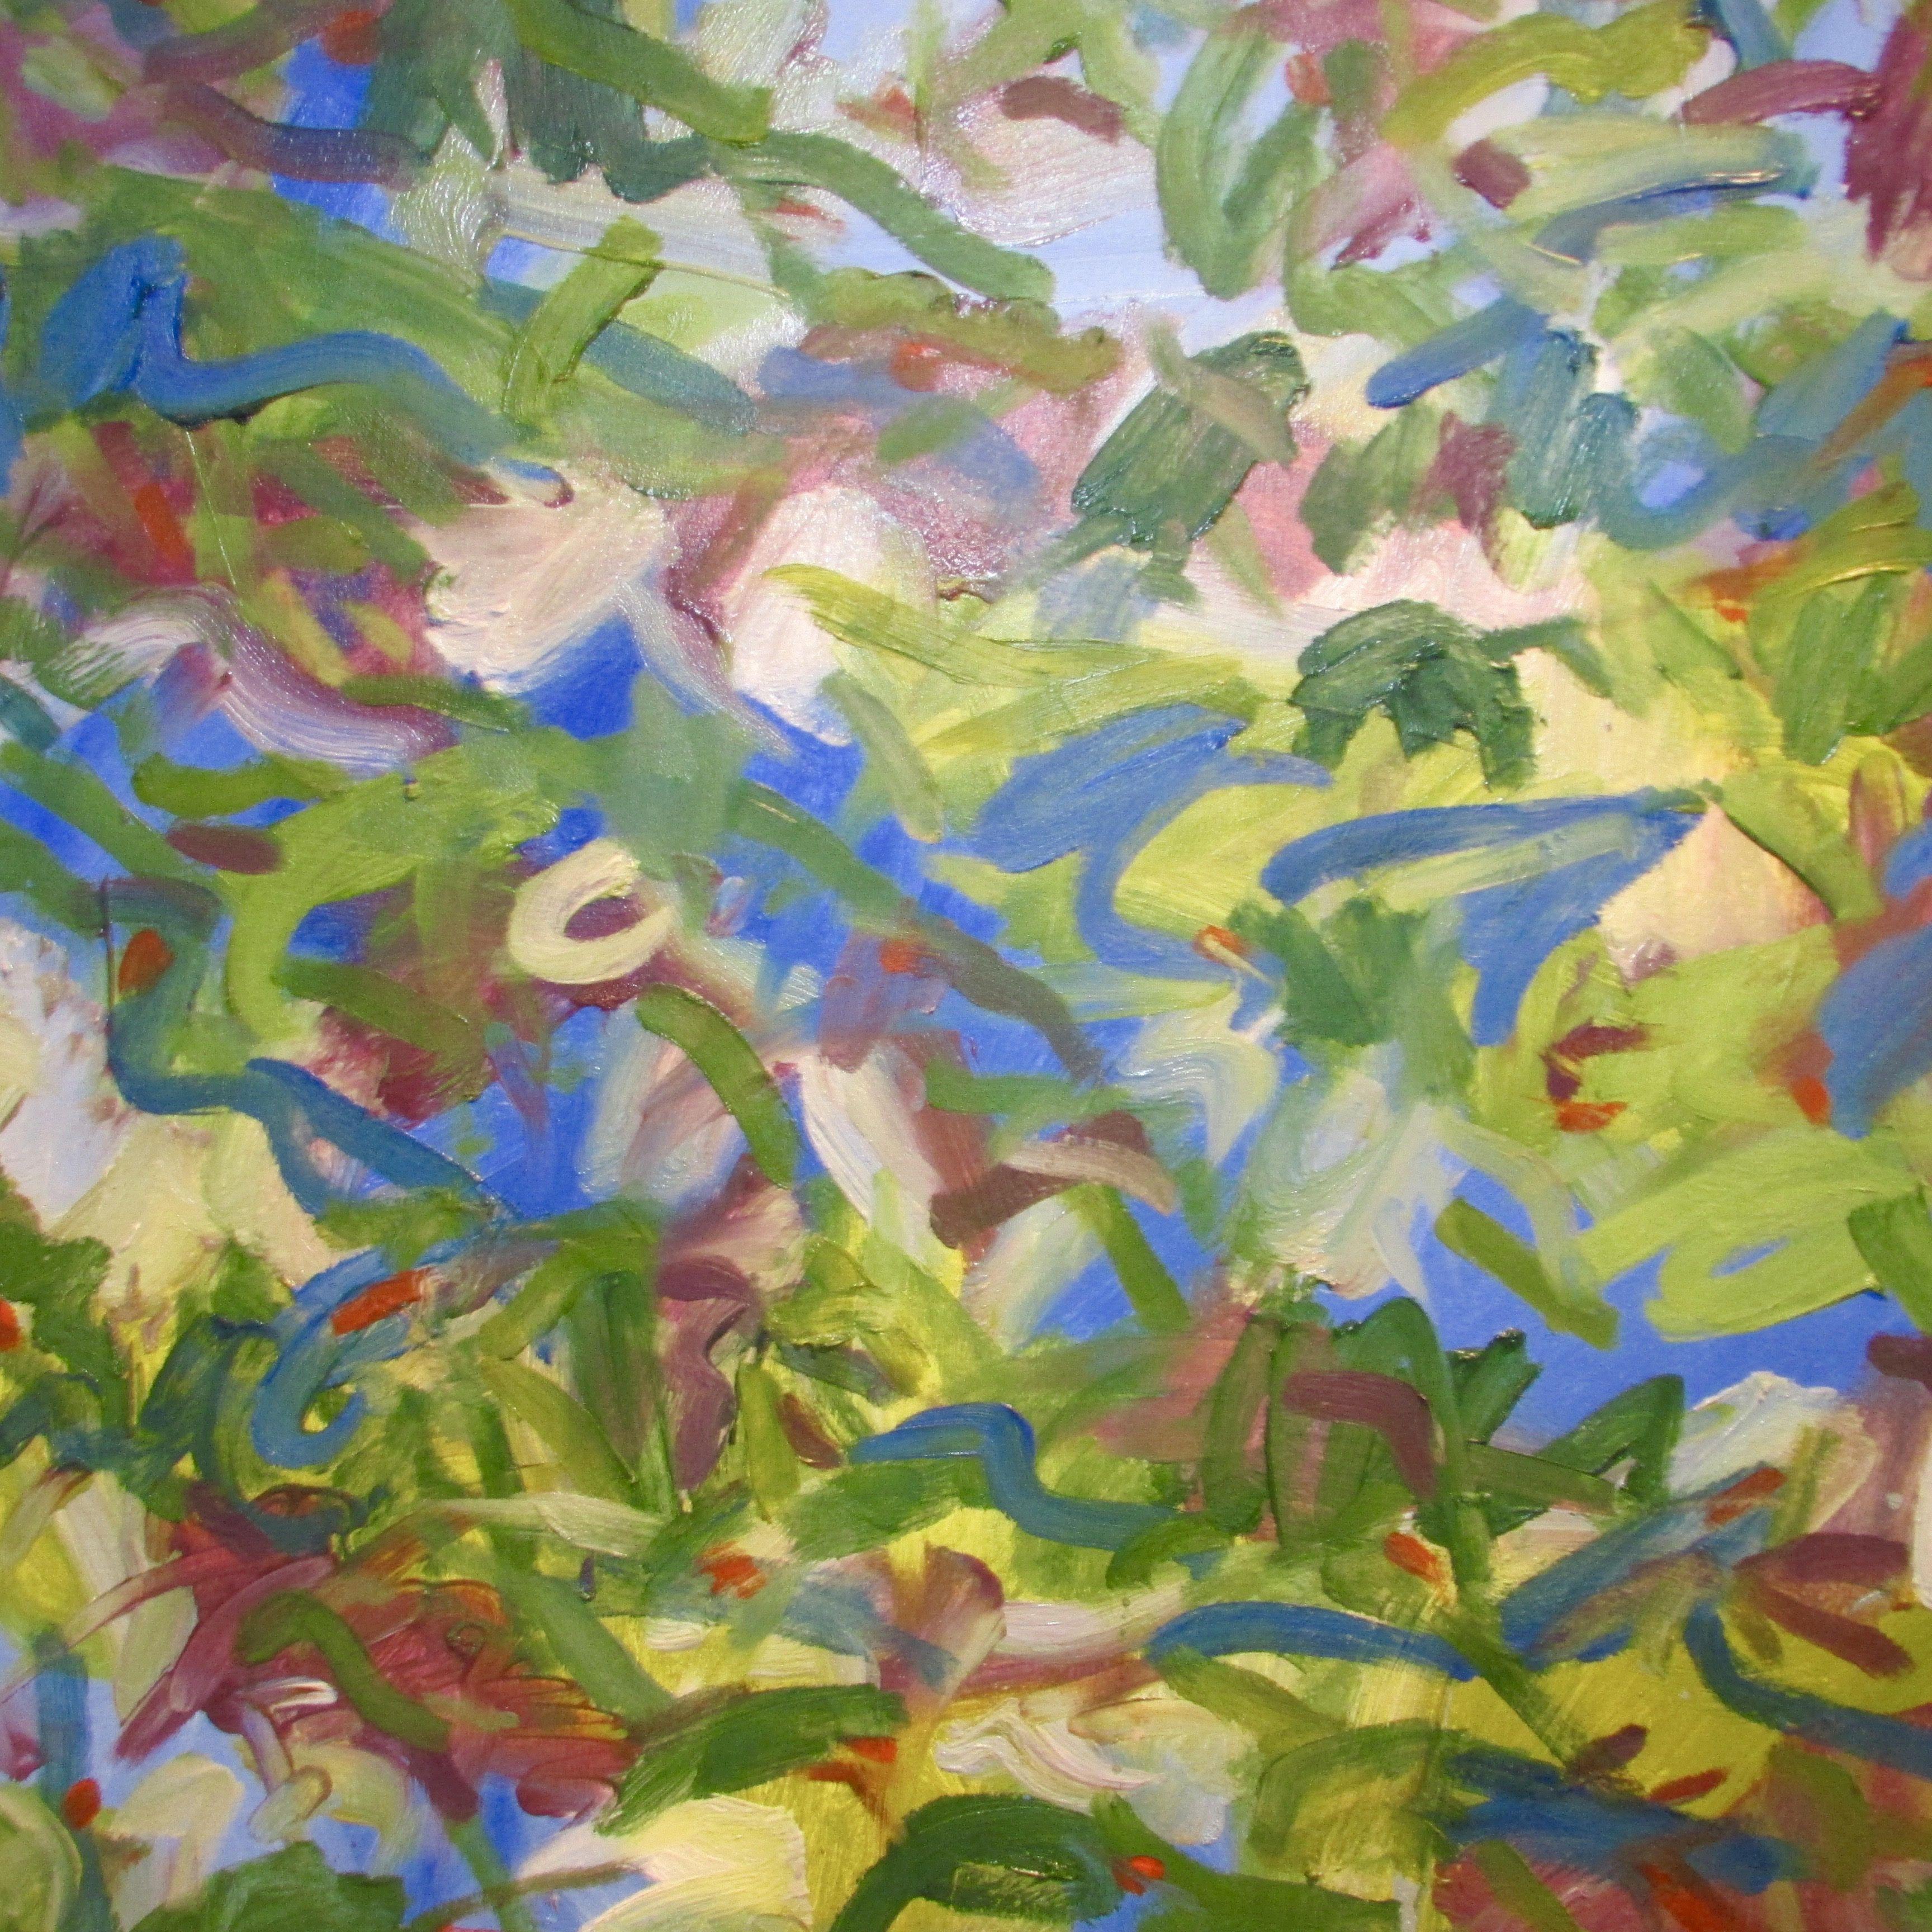 Oil on canvas inspired by natural elements, current events and other observations. My abstract paintings are all about creating excitement for the viewer through concentrated exploration. Each painting is inspired by nature, travels, or imagination